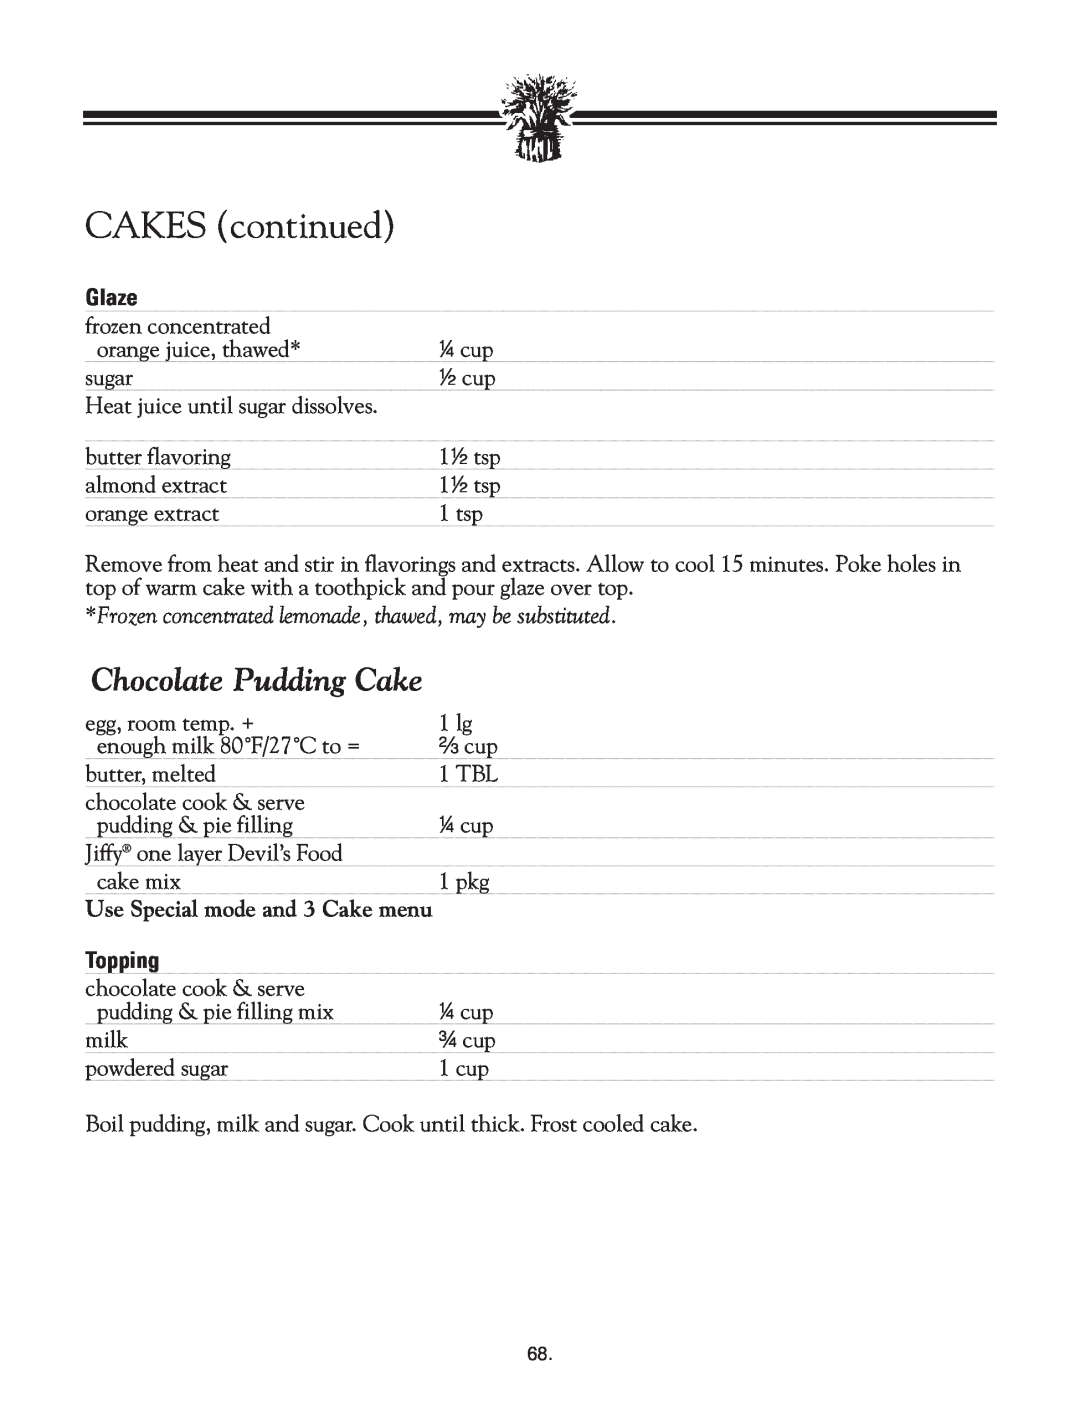 Breadman TR2828G instruction manual Chocolate Pudding Cake, Glaze, Topping, CAKES continued 